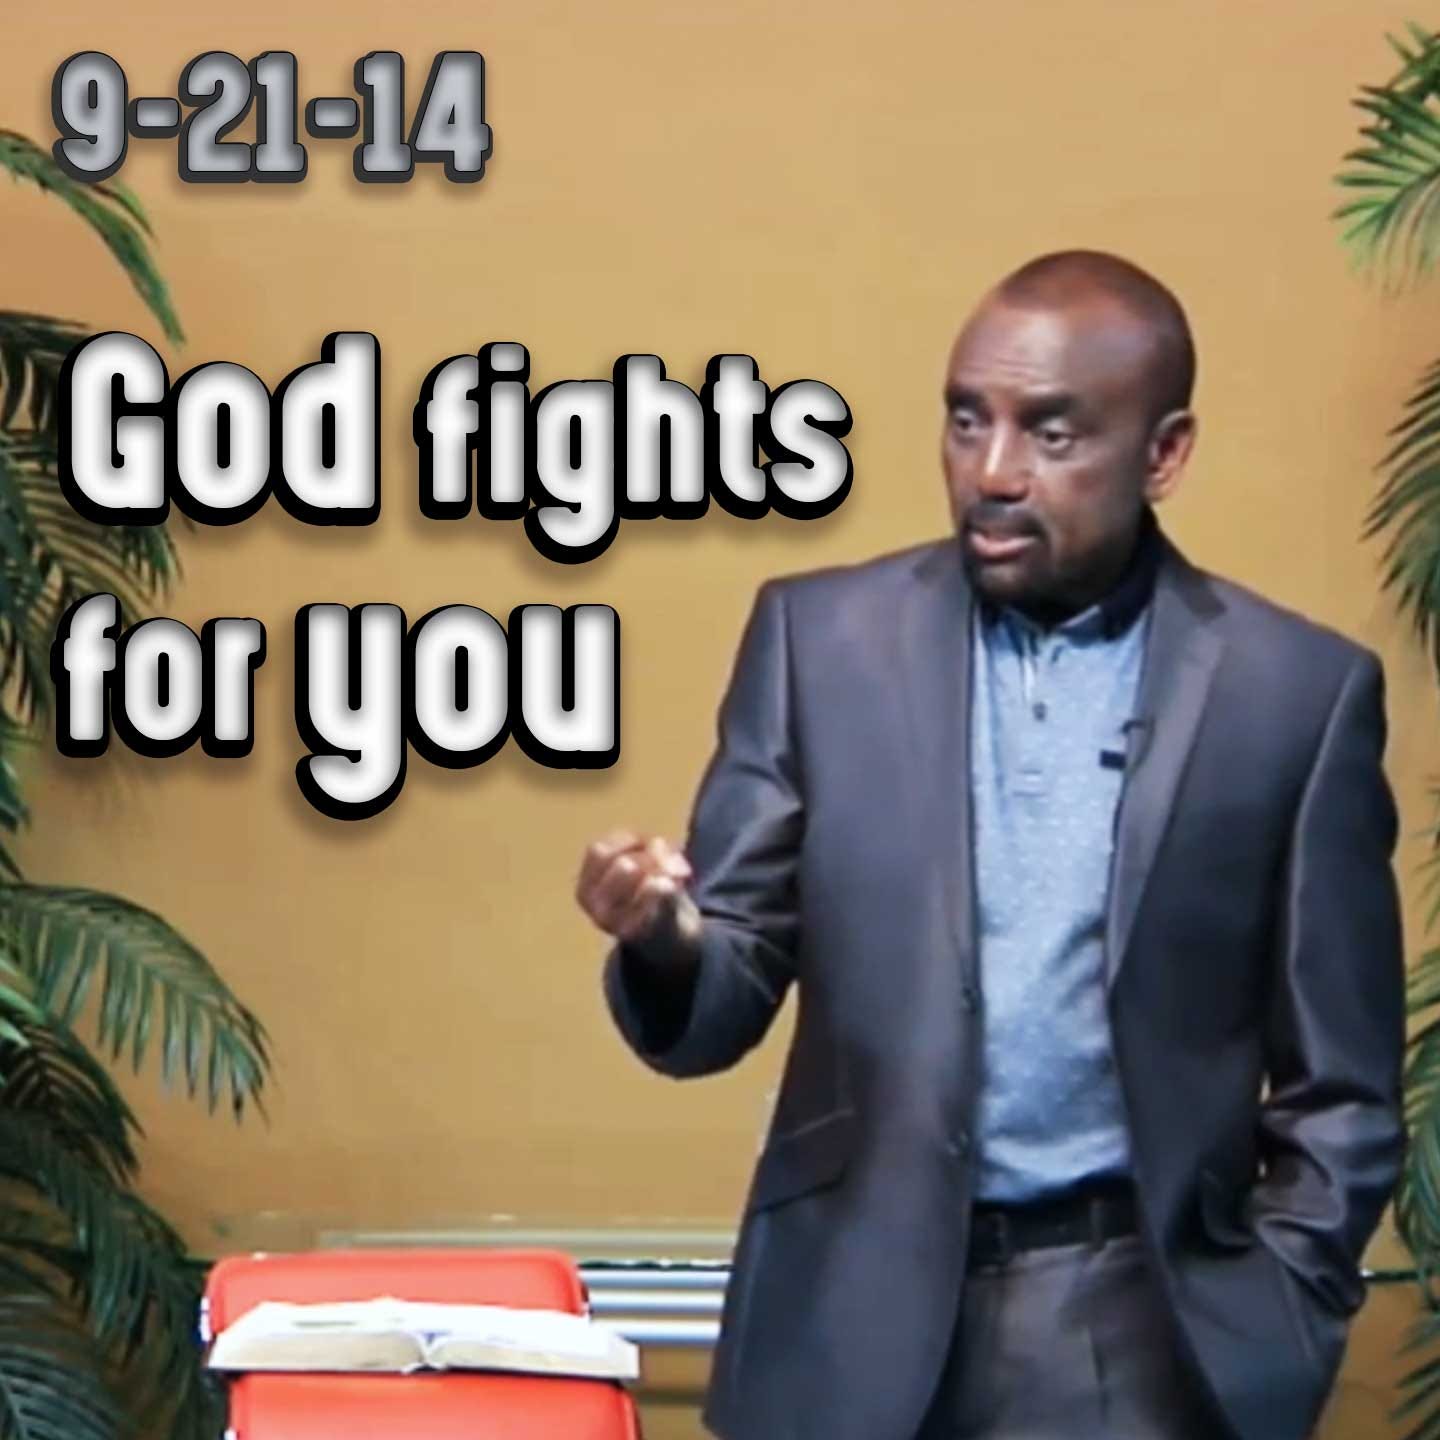 What's the Purpose of Having Faith in God? | Archive 9/21/14